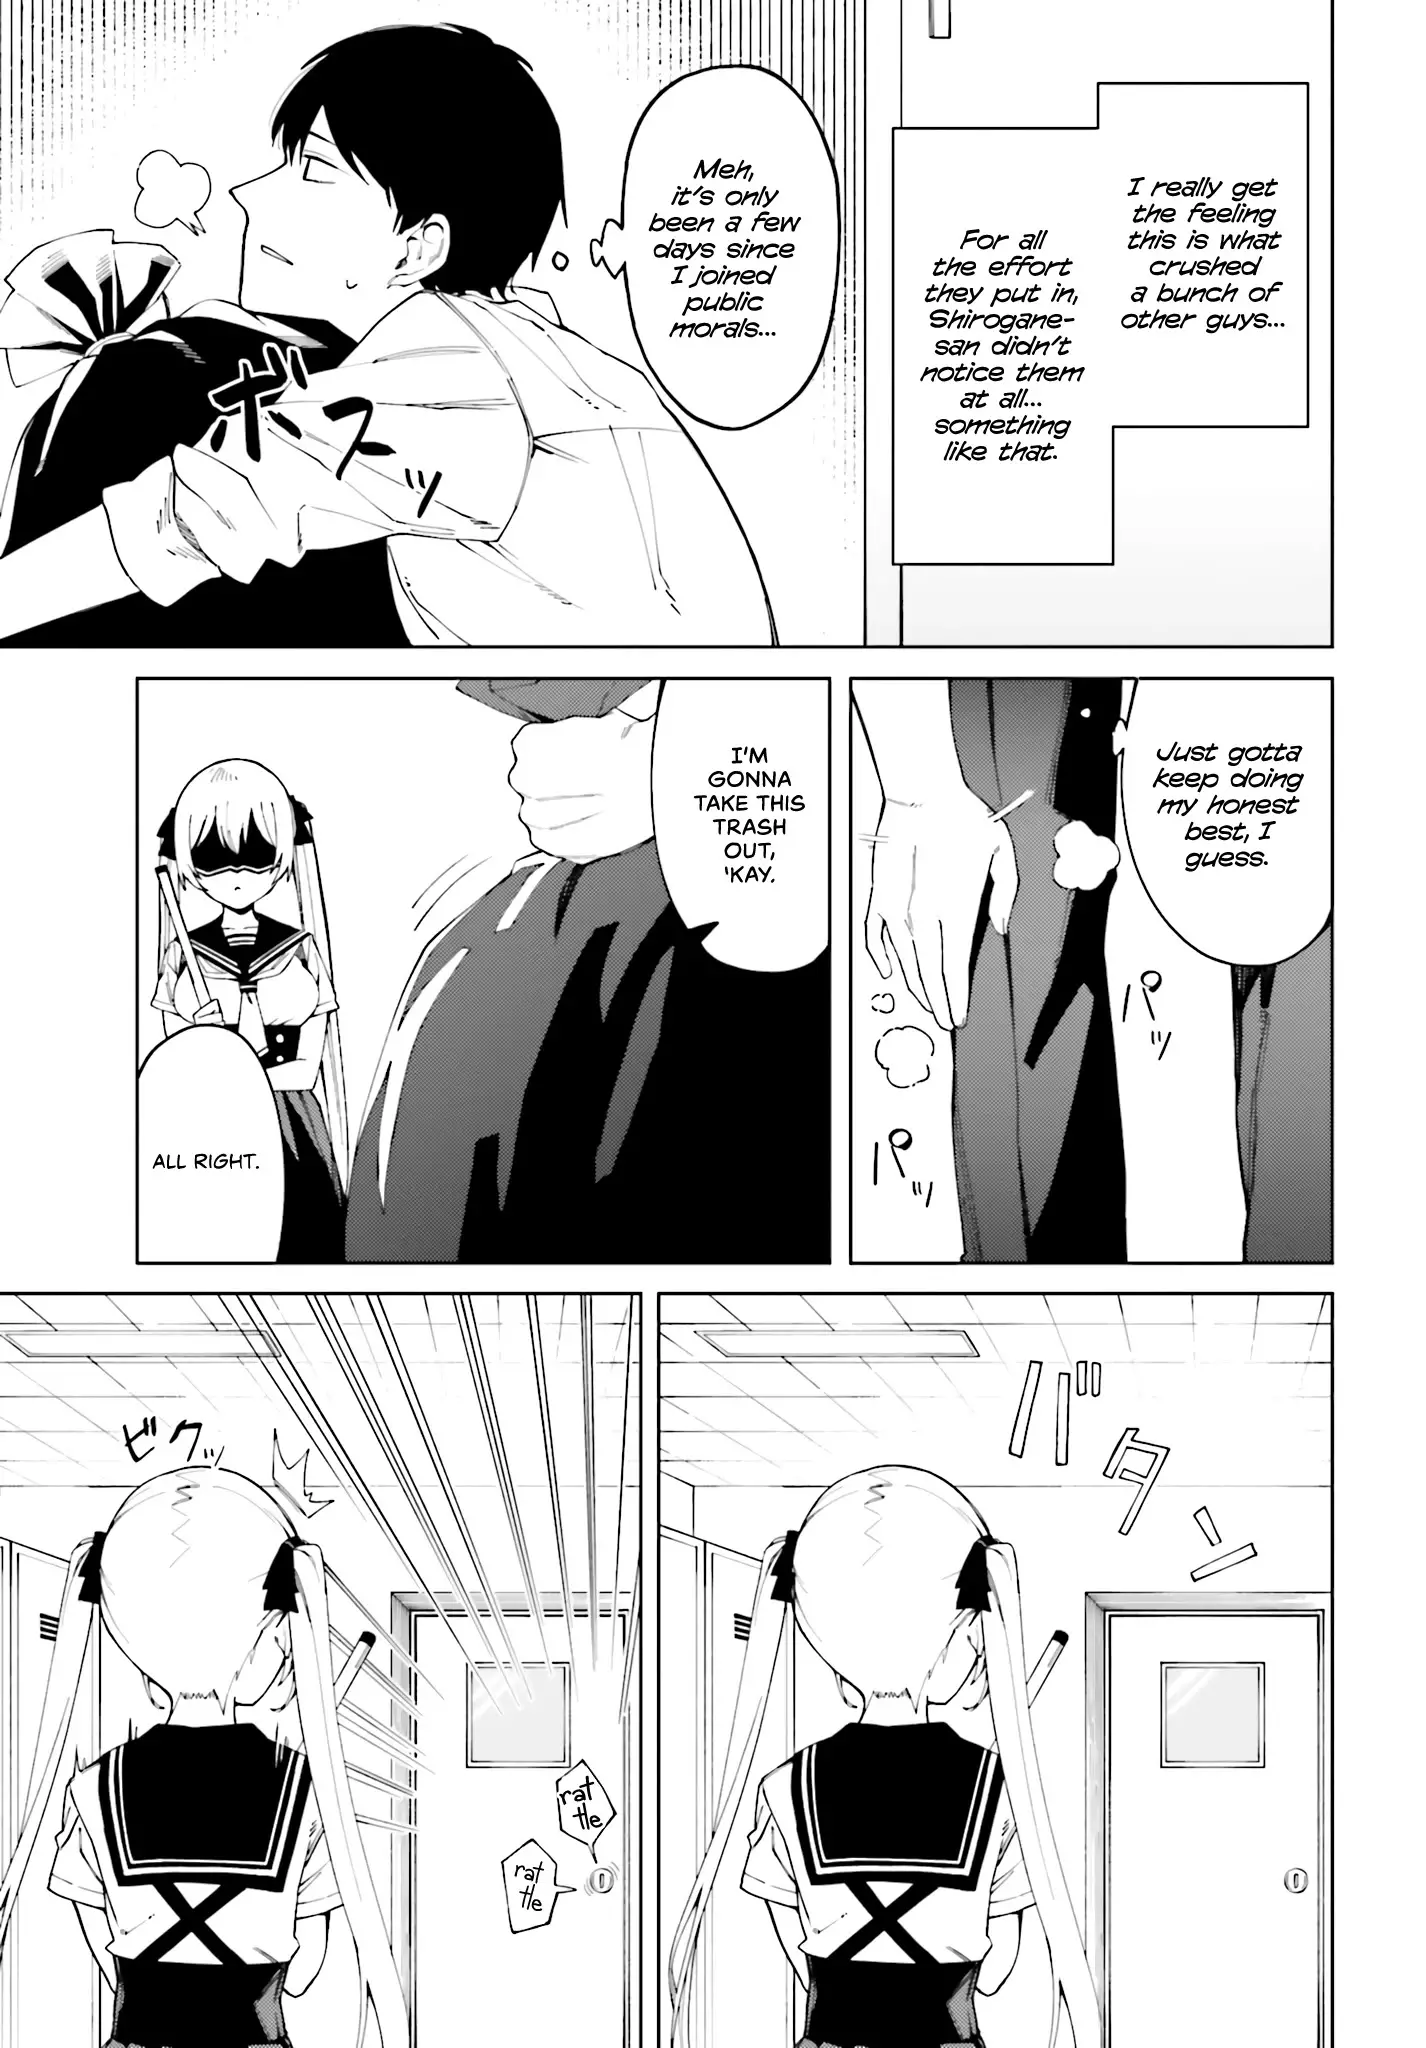 I Don't Understand Shirogane-San's Facial Expression At All - 1 page 20